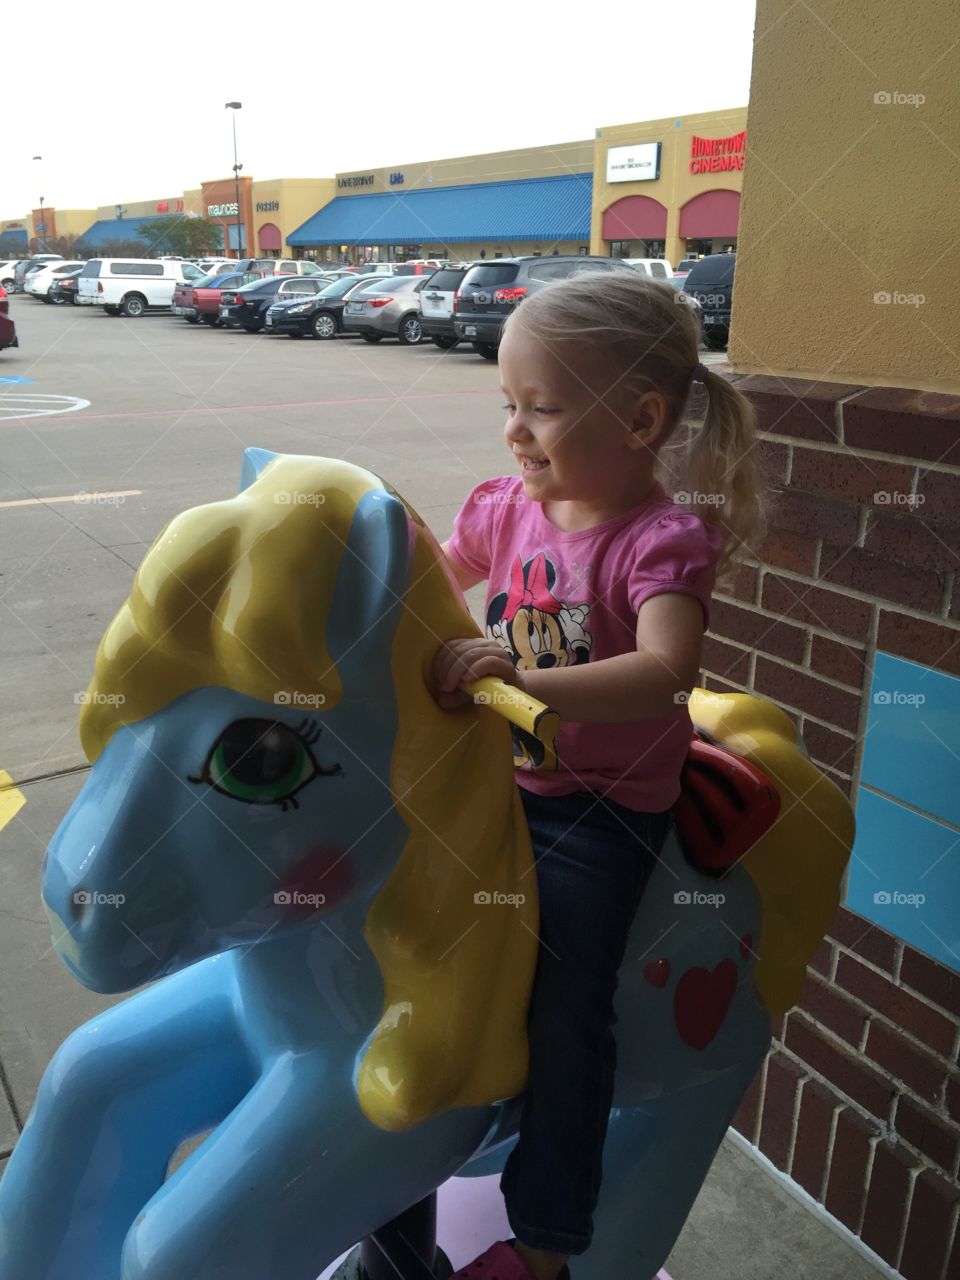 Toddler on pony ride. Girl enjoying a pony ride at the shopping mall